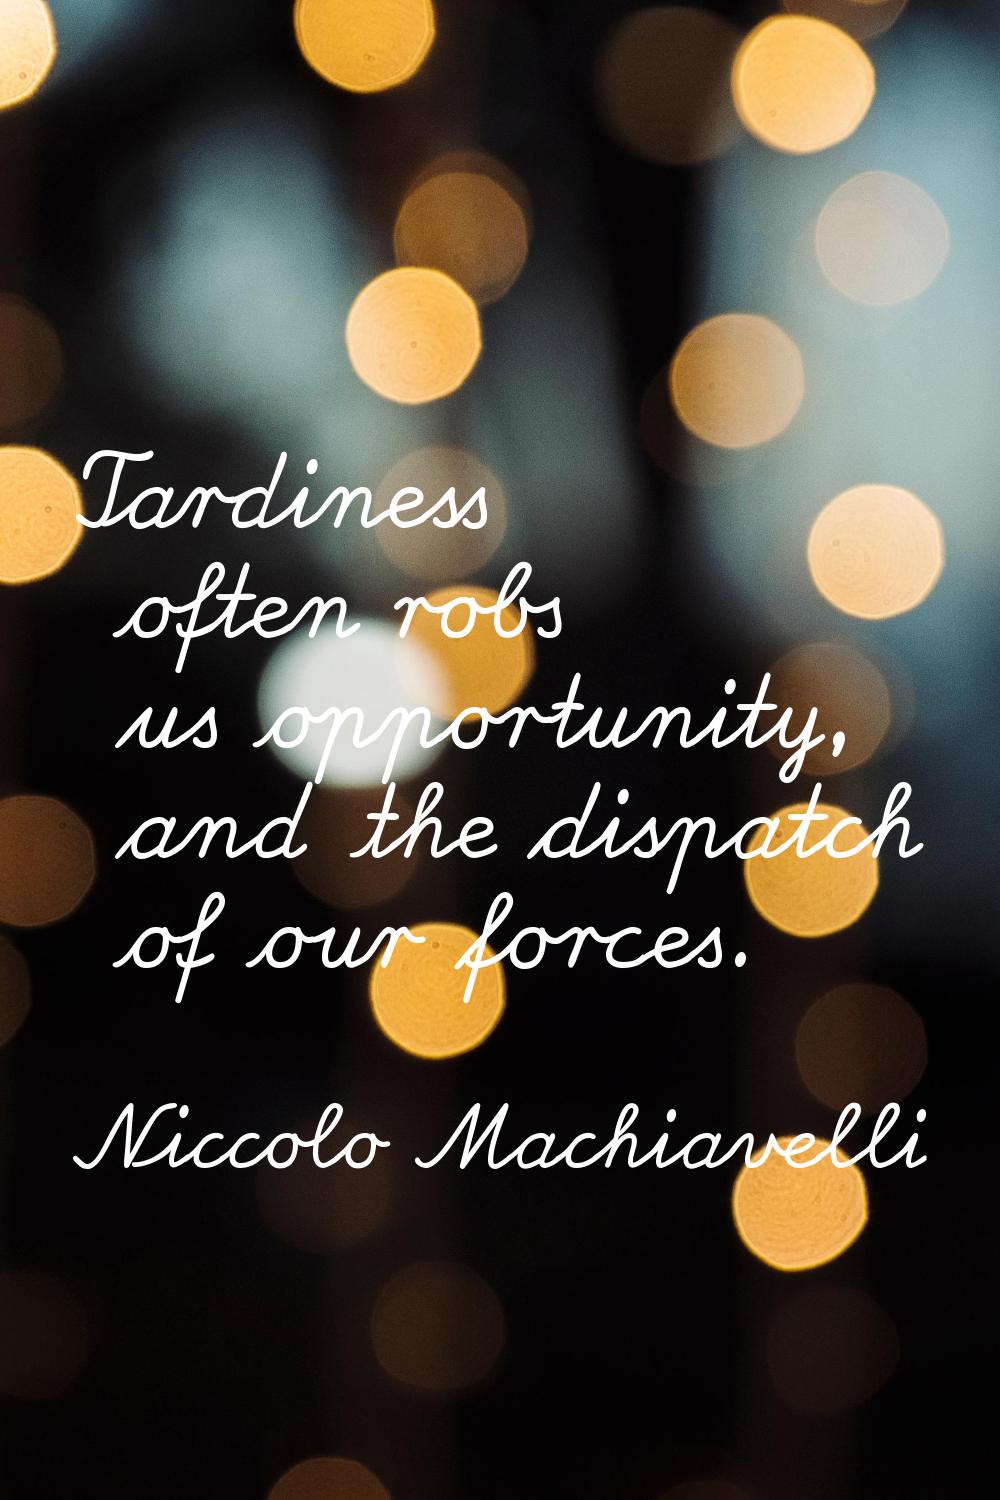 Tardiness often robs us opportunity, and the dispatch of our forces.